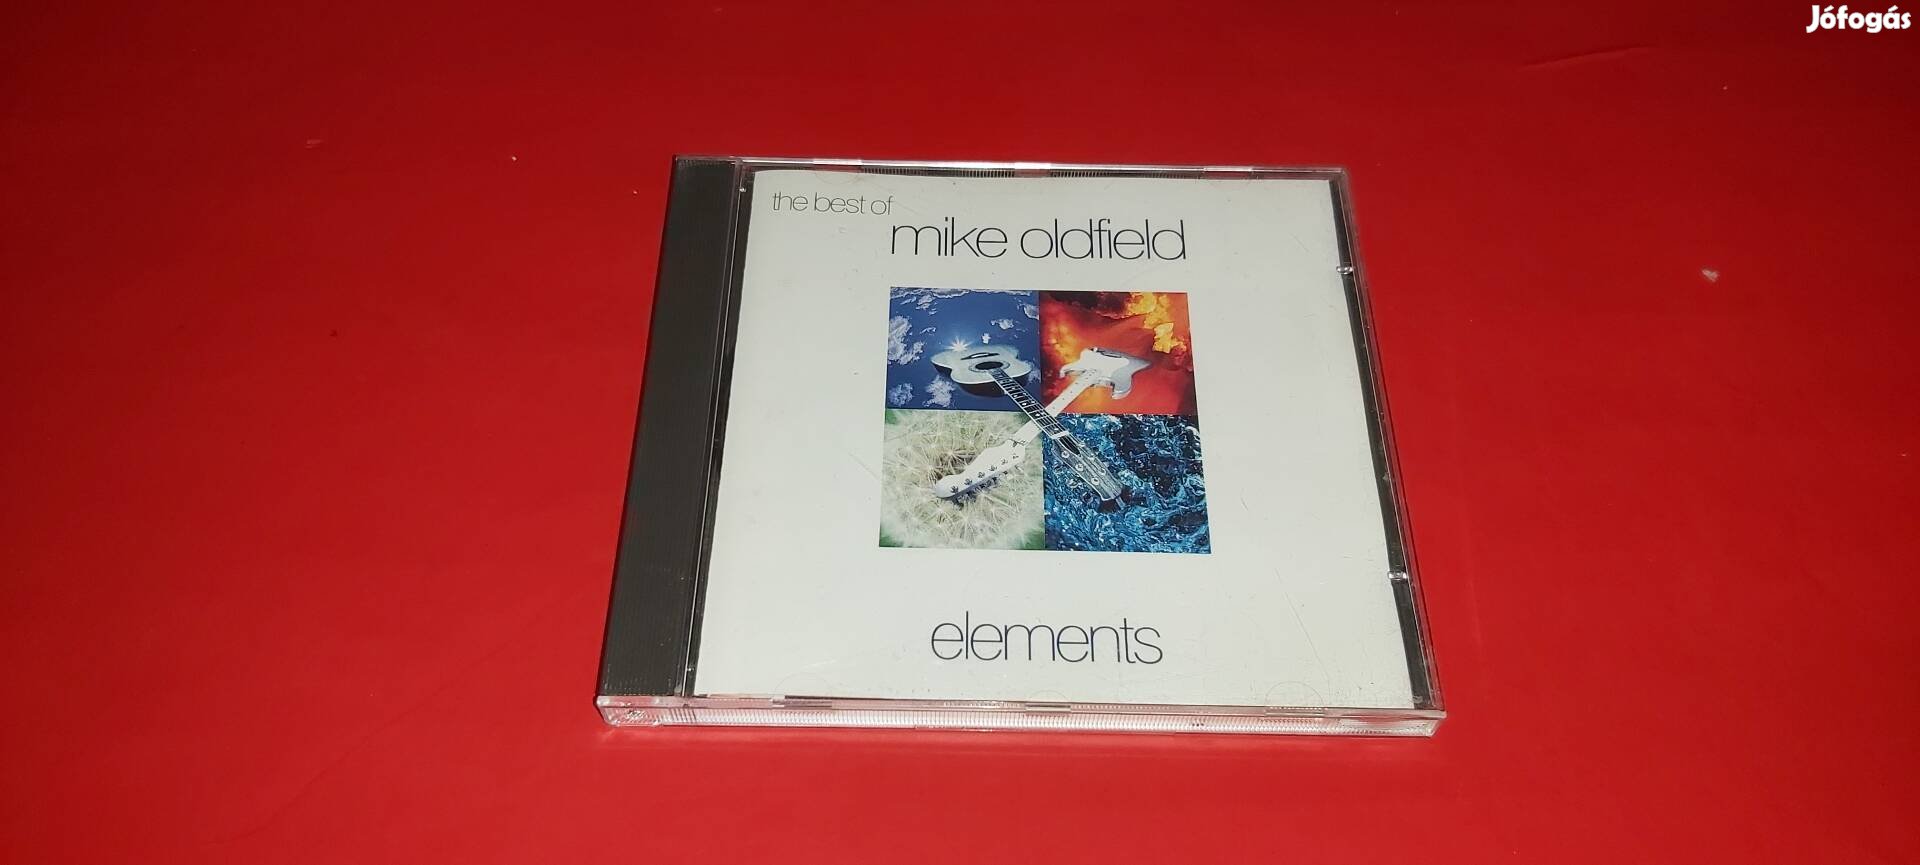 Mike Oldfield The best of Elements Cd 1993